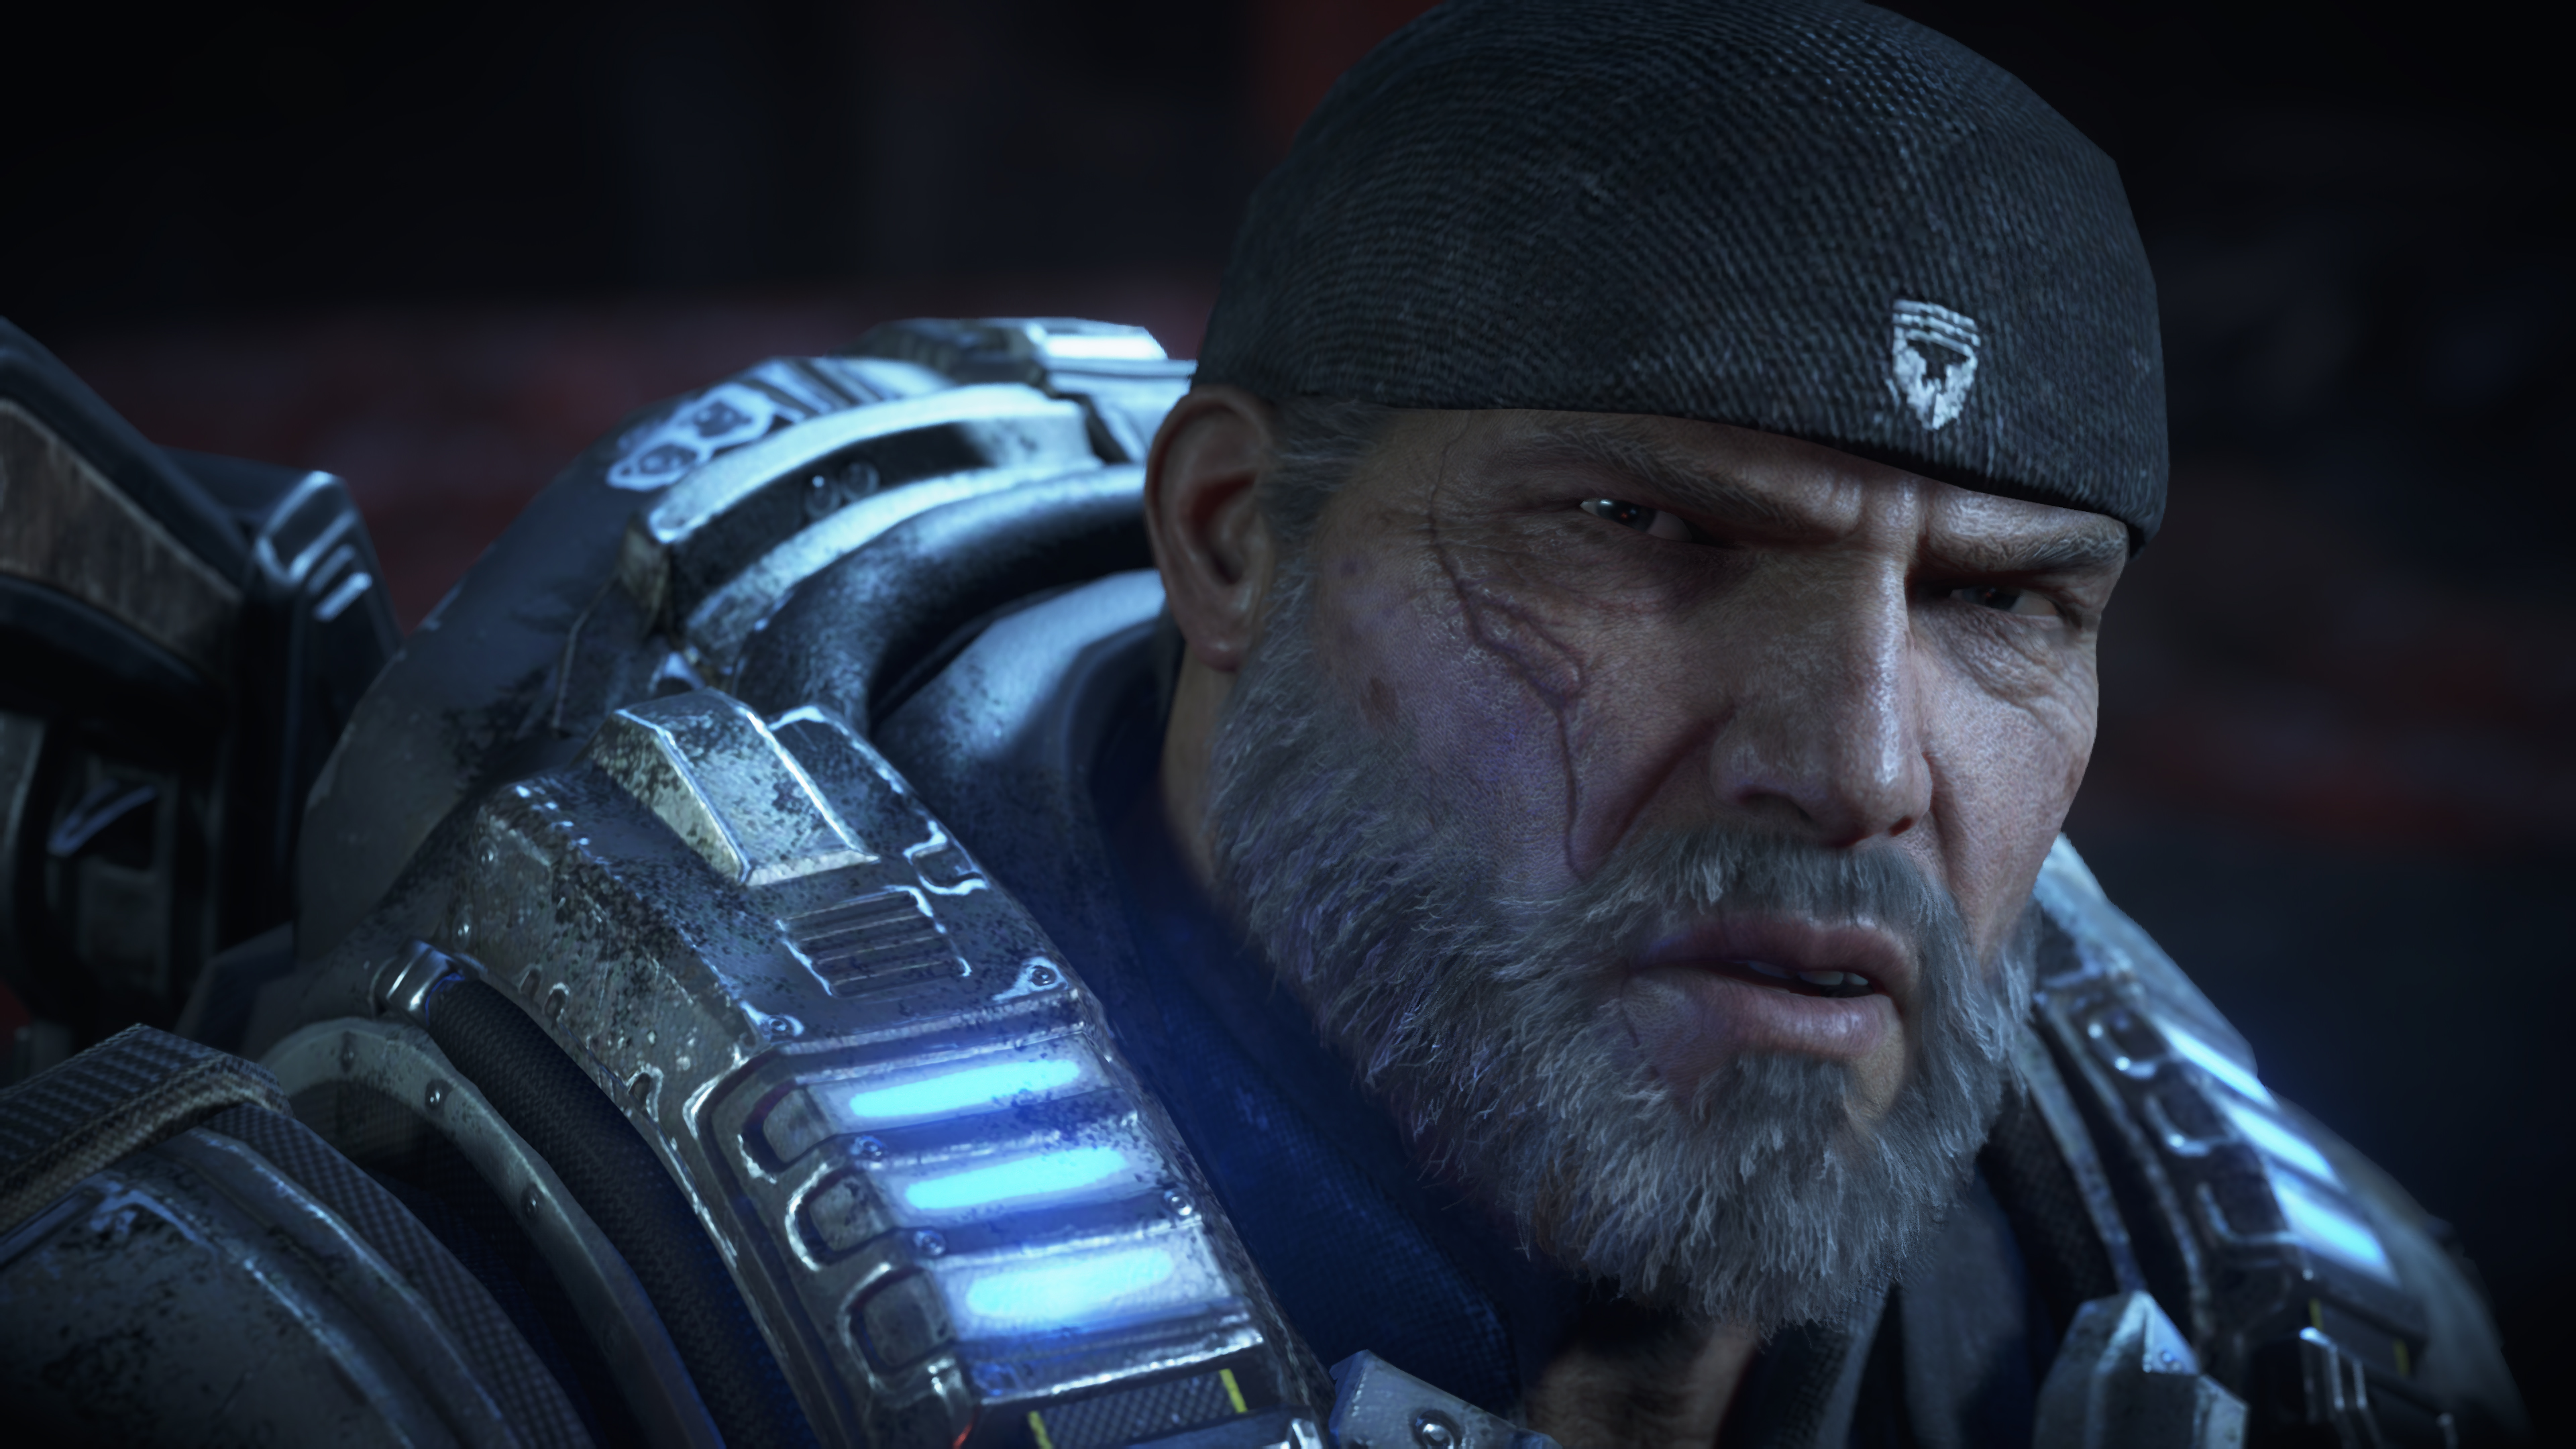 Gears of War 4 review: Keeping up the family tradition